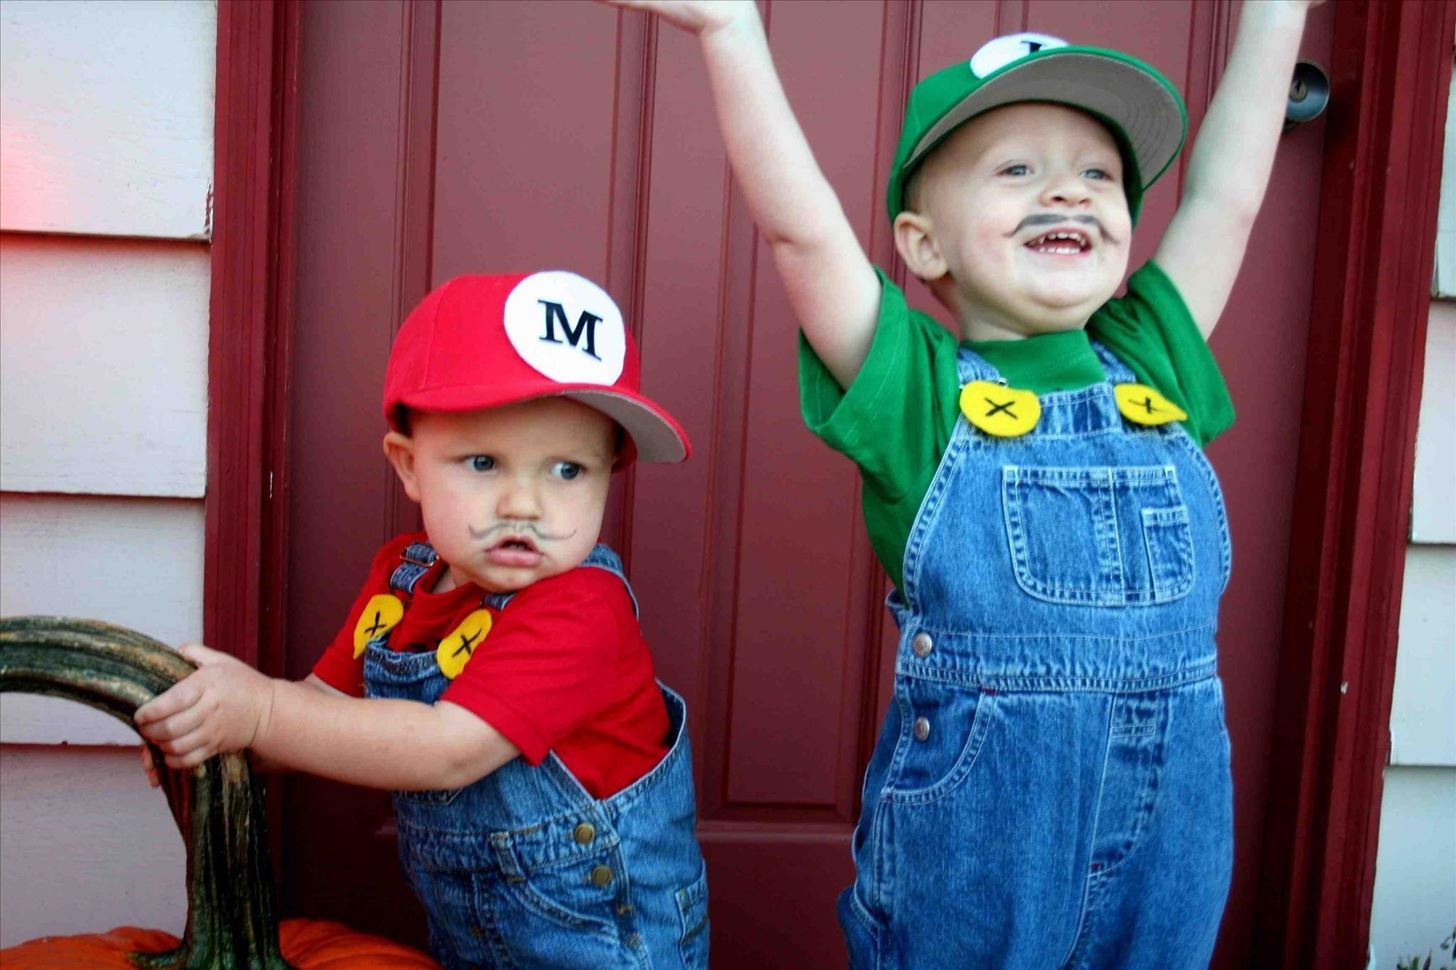 DIY Toddler Halloween Costumes
 10 Cheap Easy & Awesome DIY Halloween Costumes for Kids